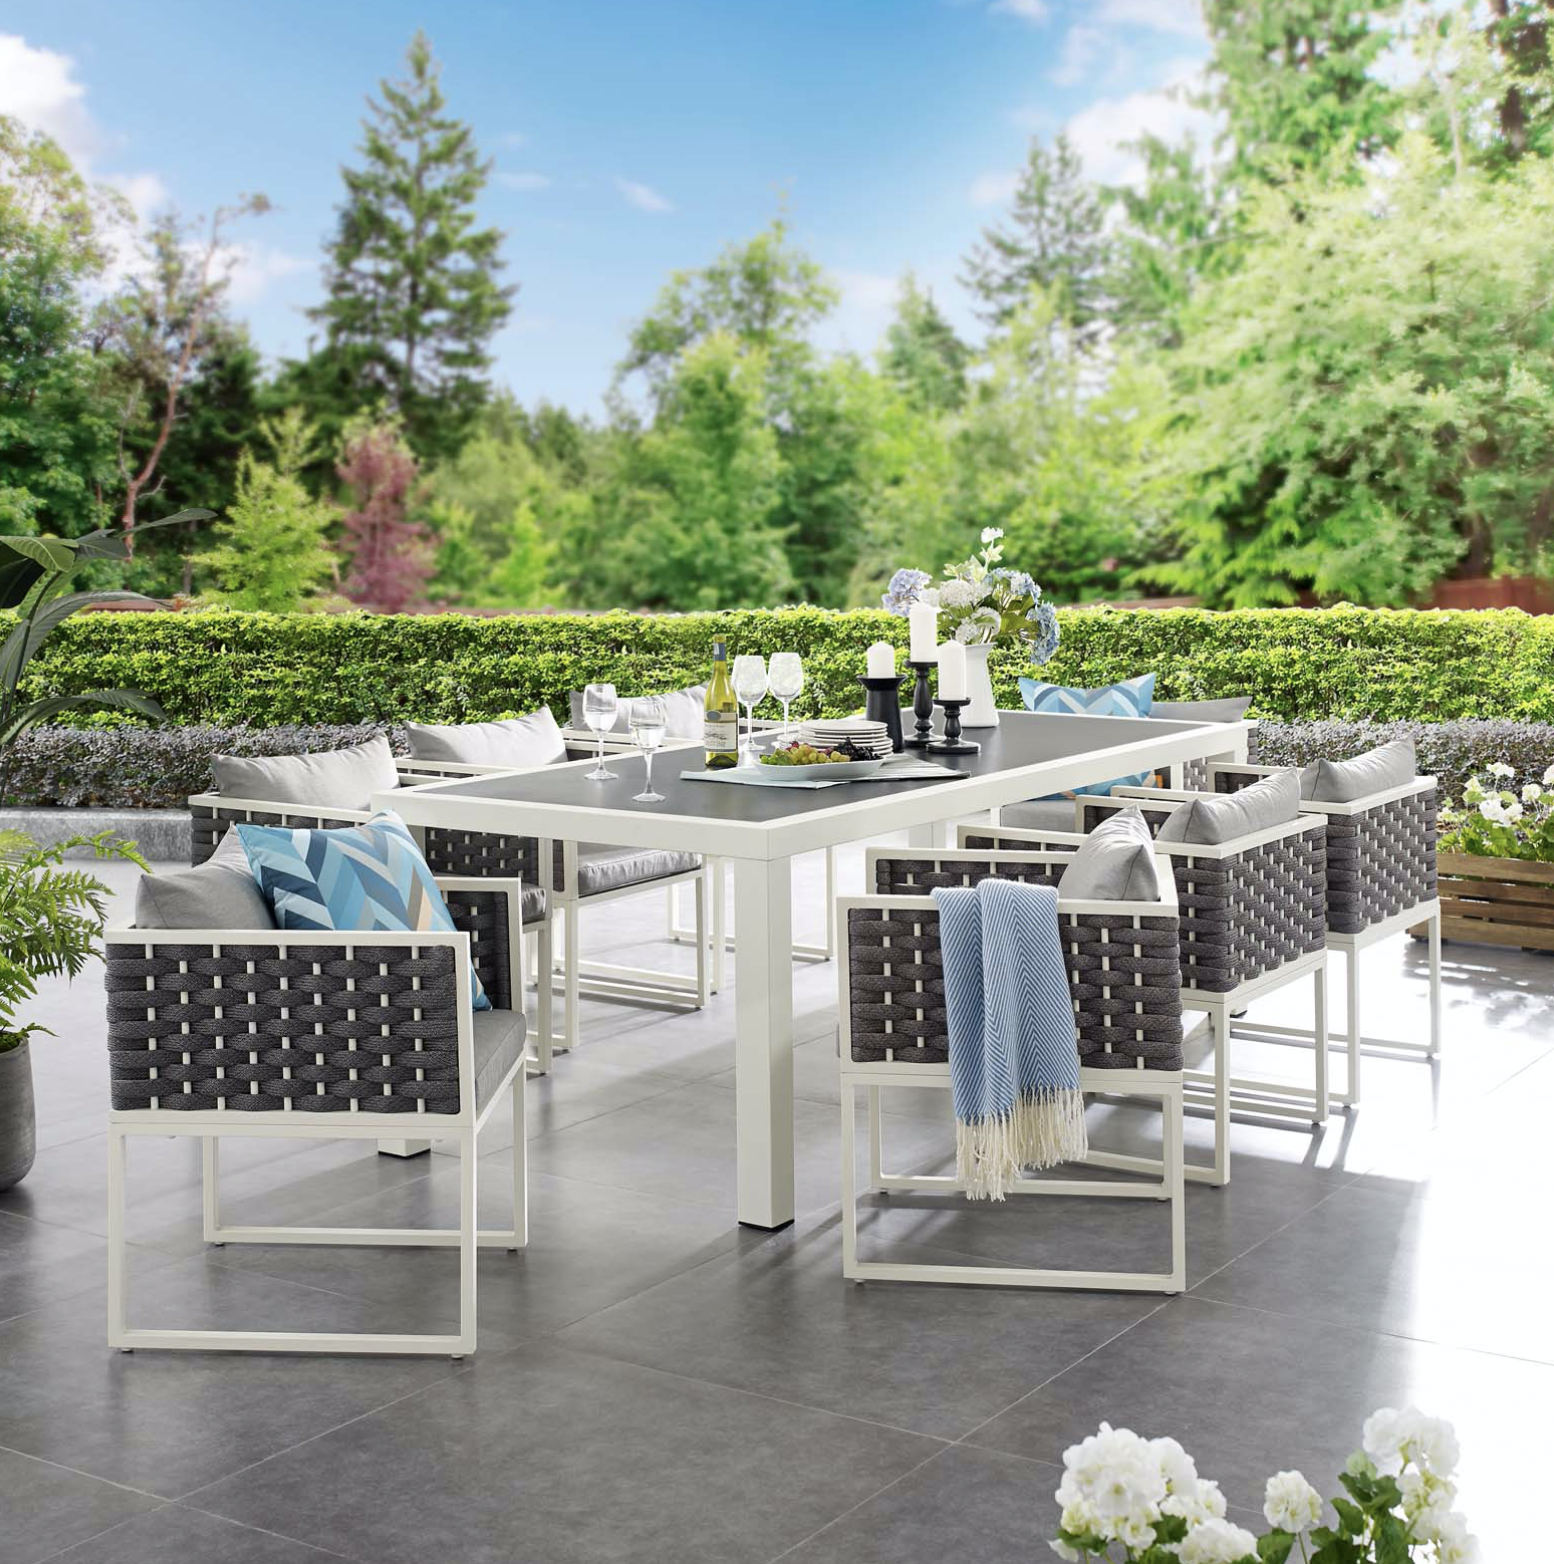 Best Outdoor Furniture for Summer: How to Decorate Your Patio in 2021